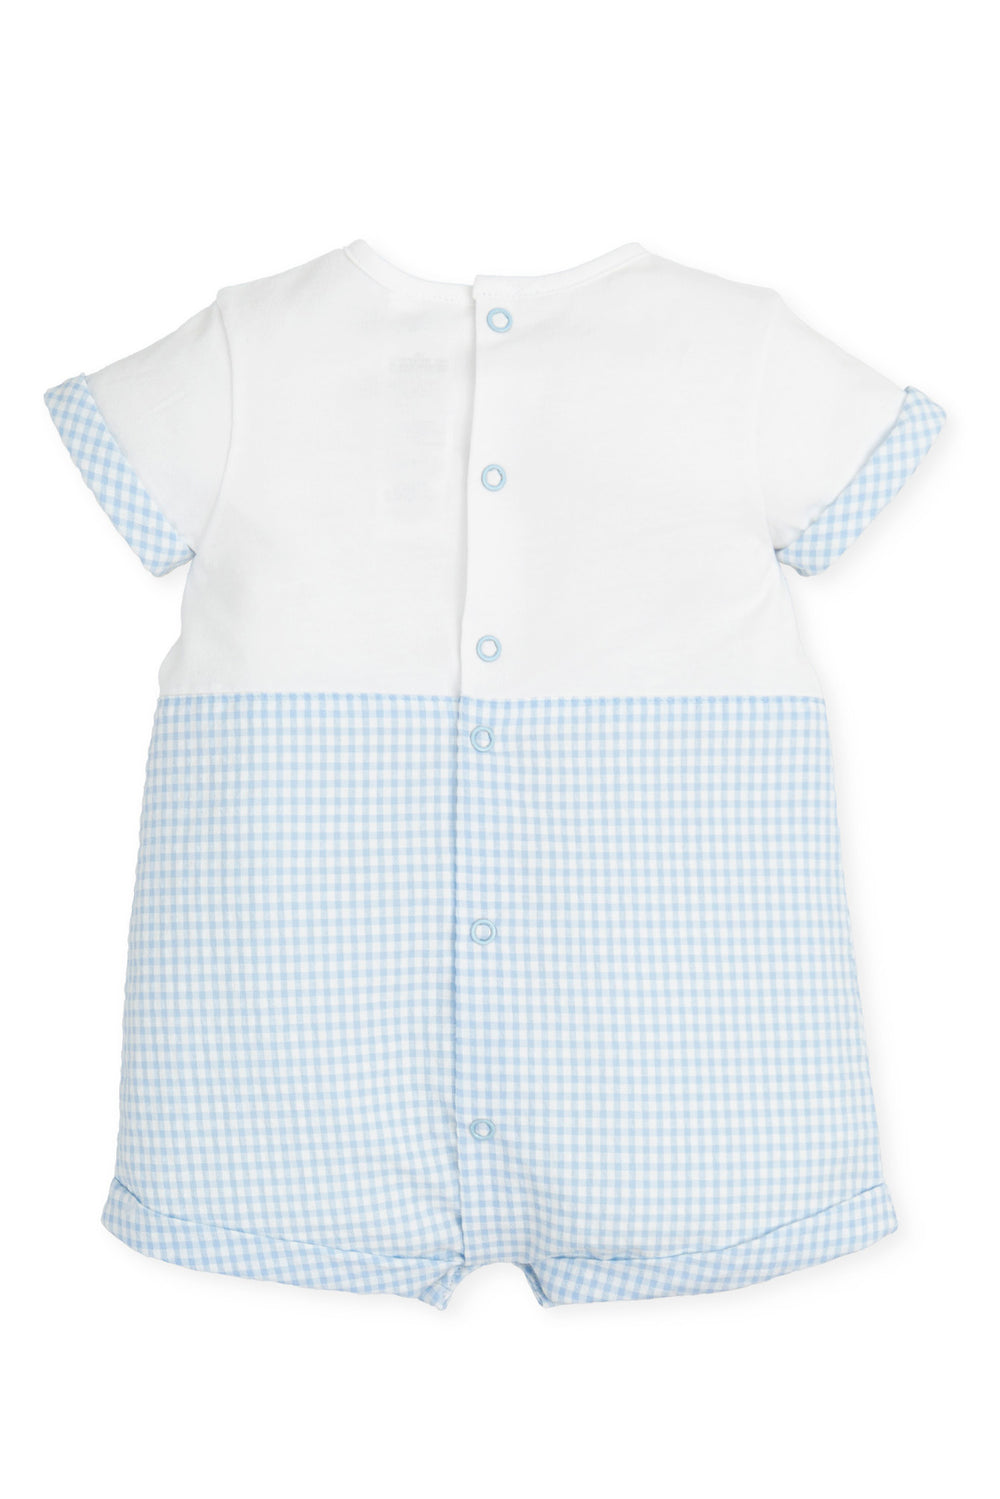 Tutto Piccolo "Amias" Blue Gingham Dungaree Romper | iphoneandroidapplications